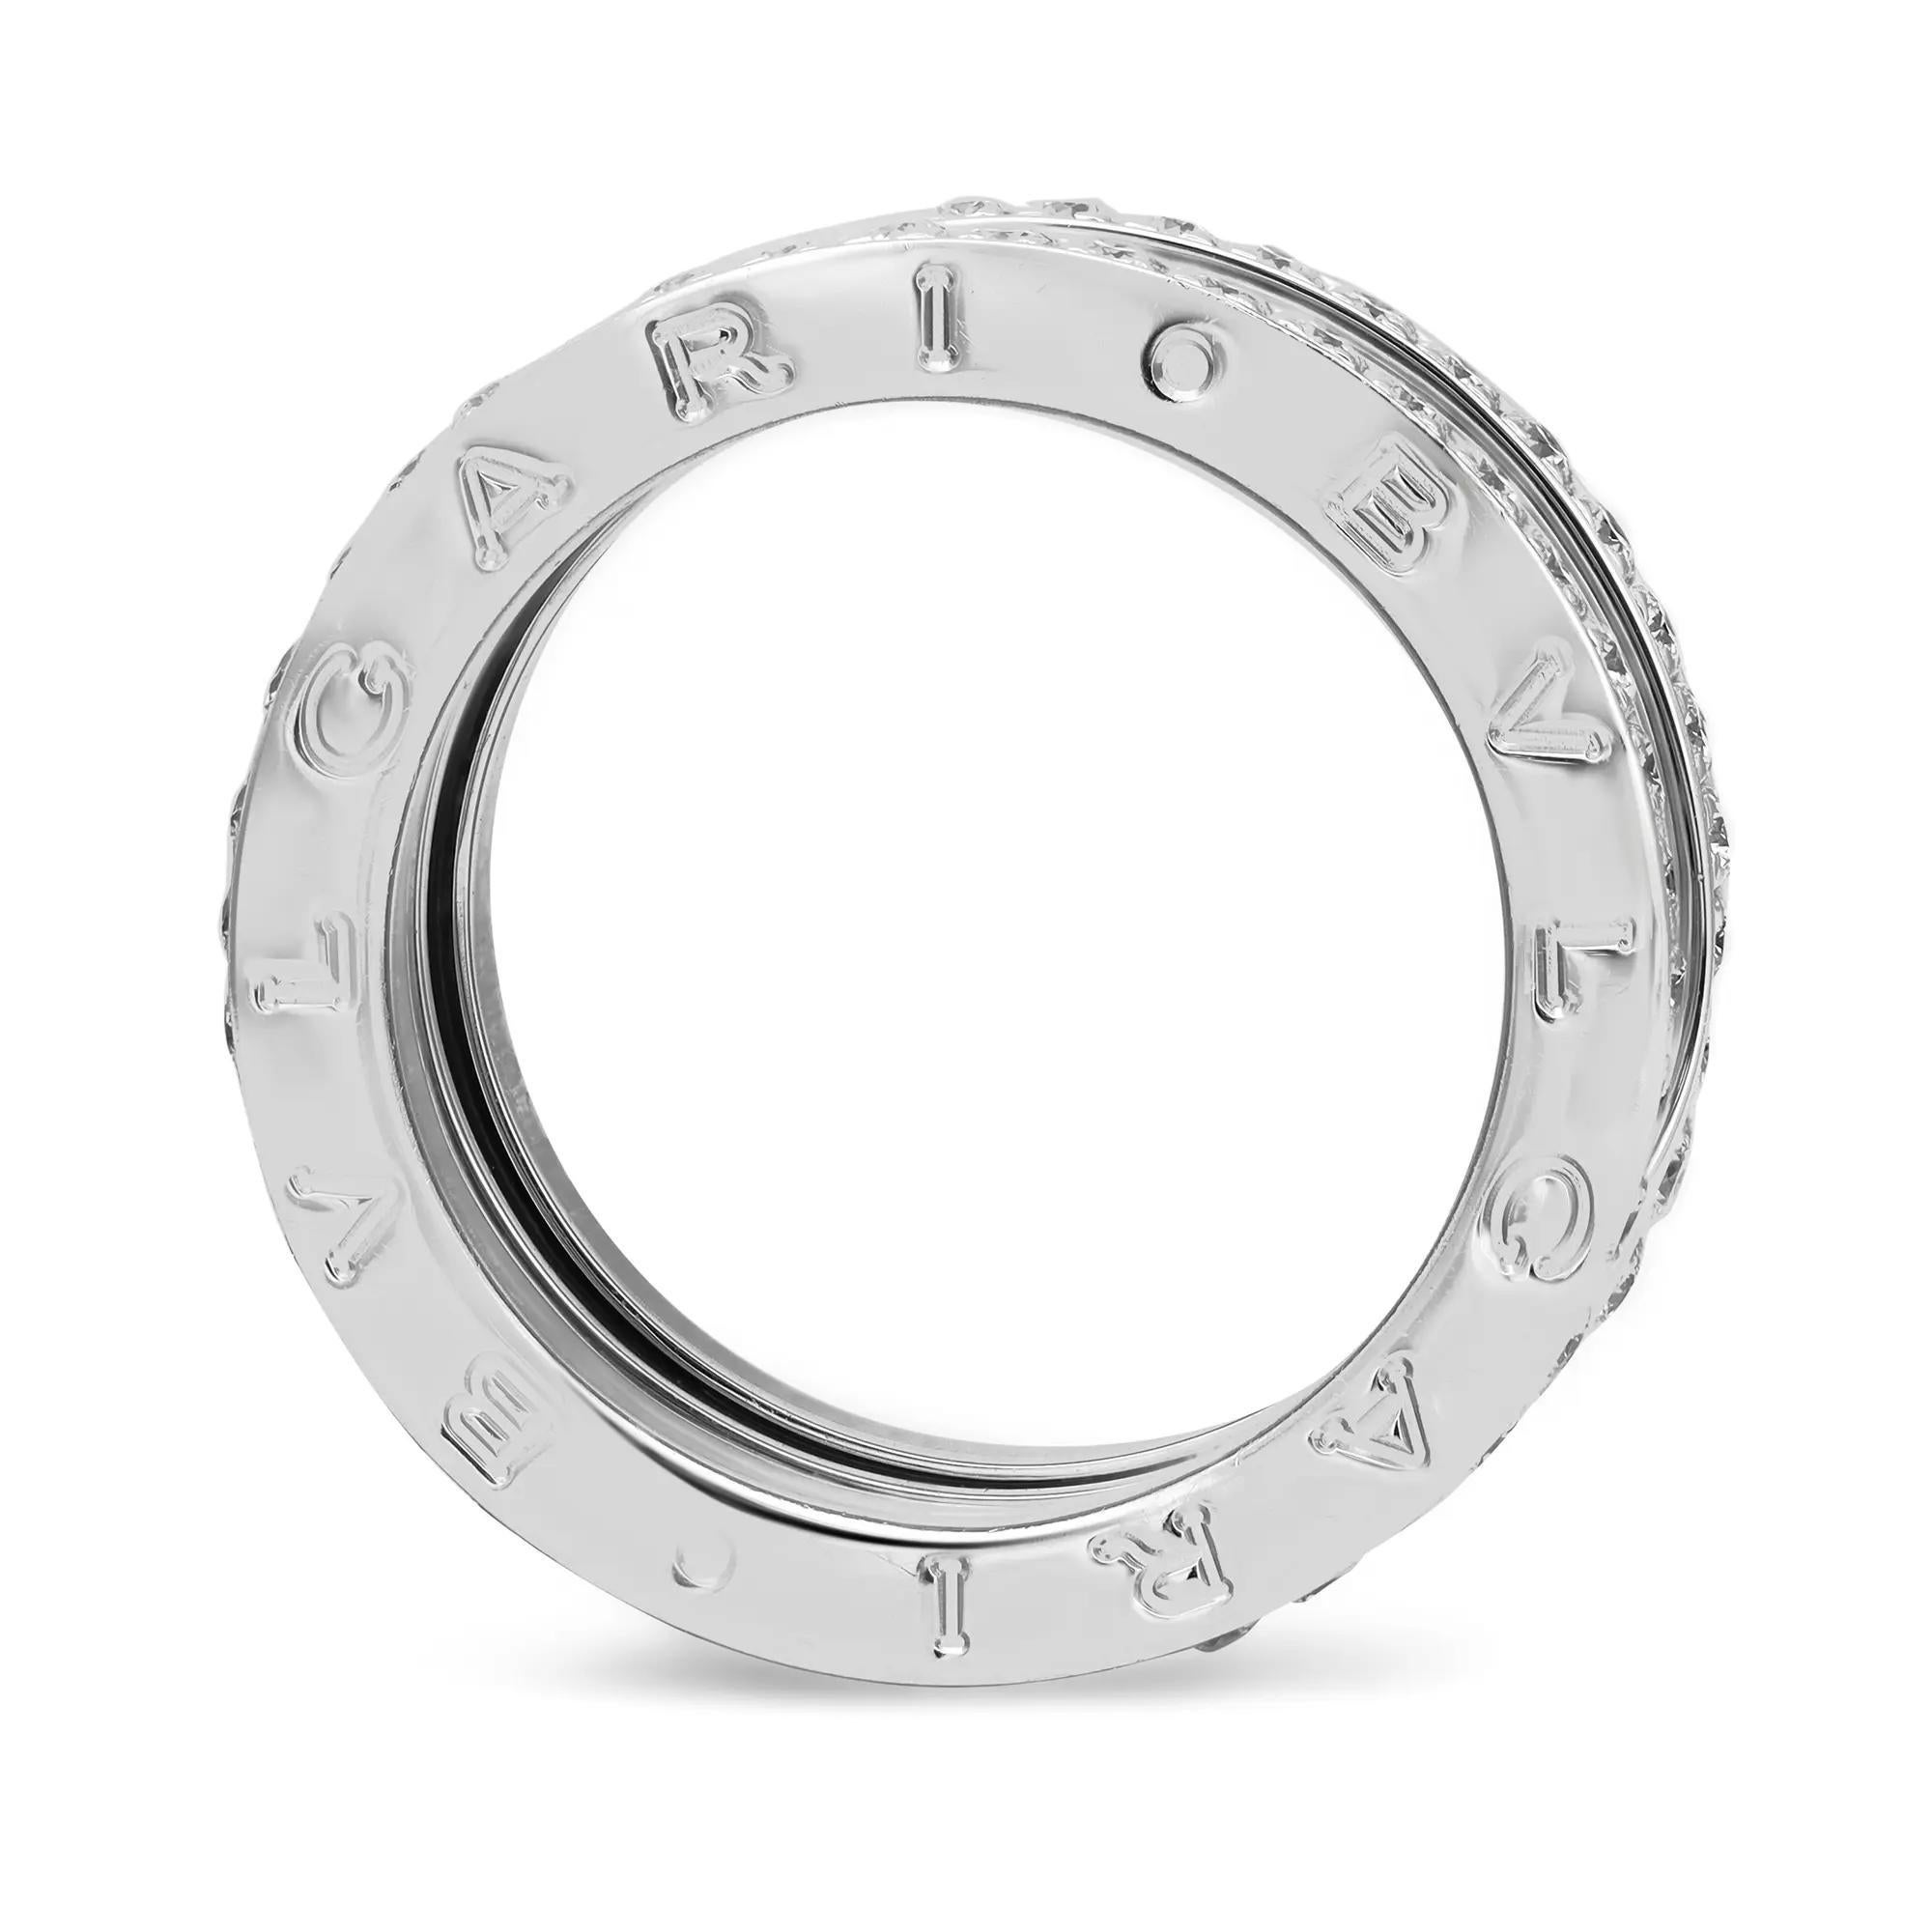 From the Bvlgari B.zero1 collection, this beautiful four-band ring is crafted in a lustrous 18K white gold. It features a distinctive four-band spiral ring with pavé set round brilliant cut diamonds on the rims with the BVLGARI logo engraved on both